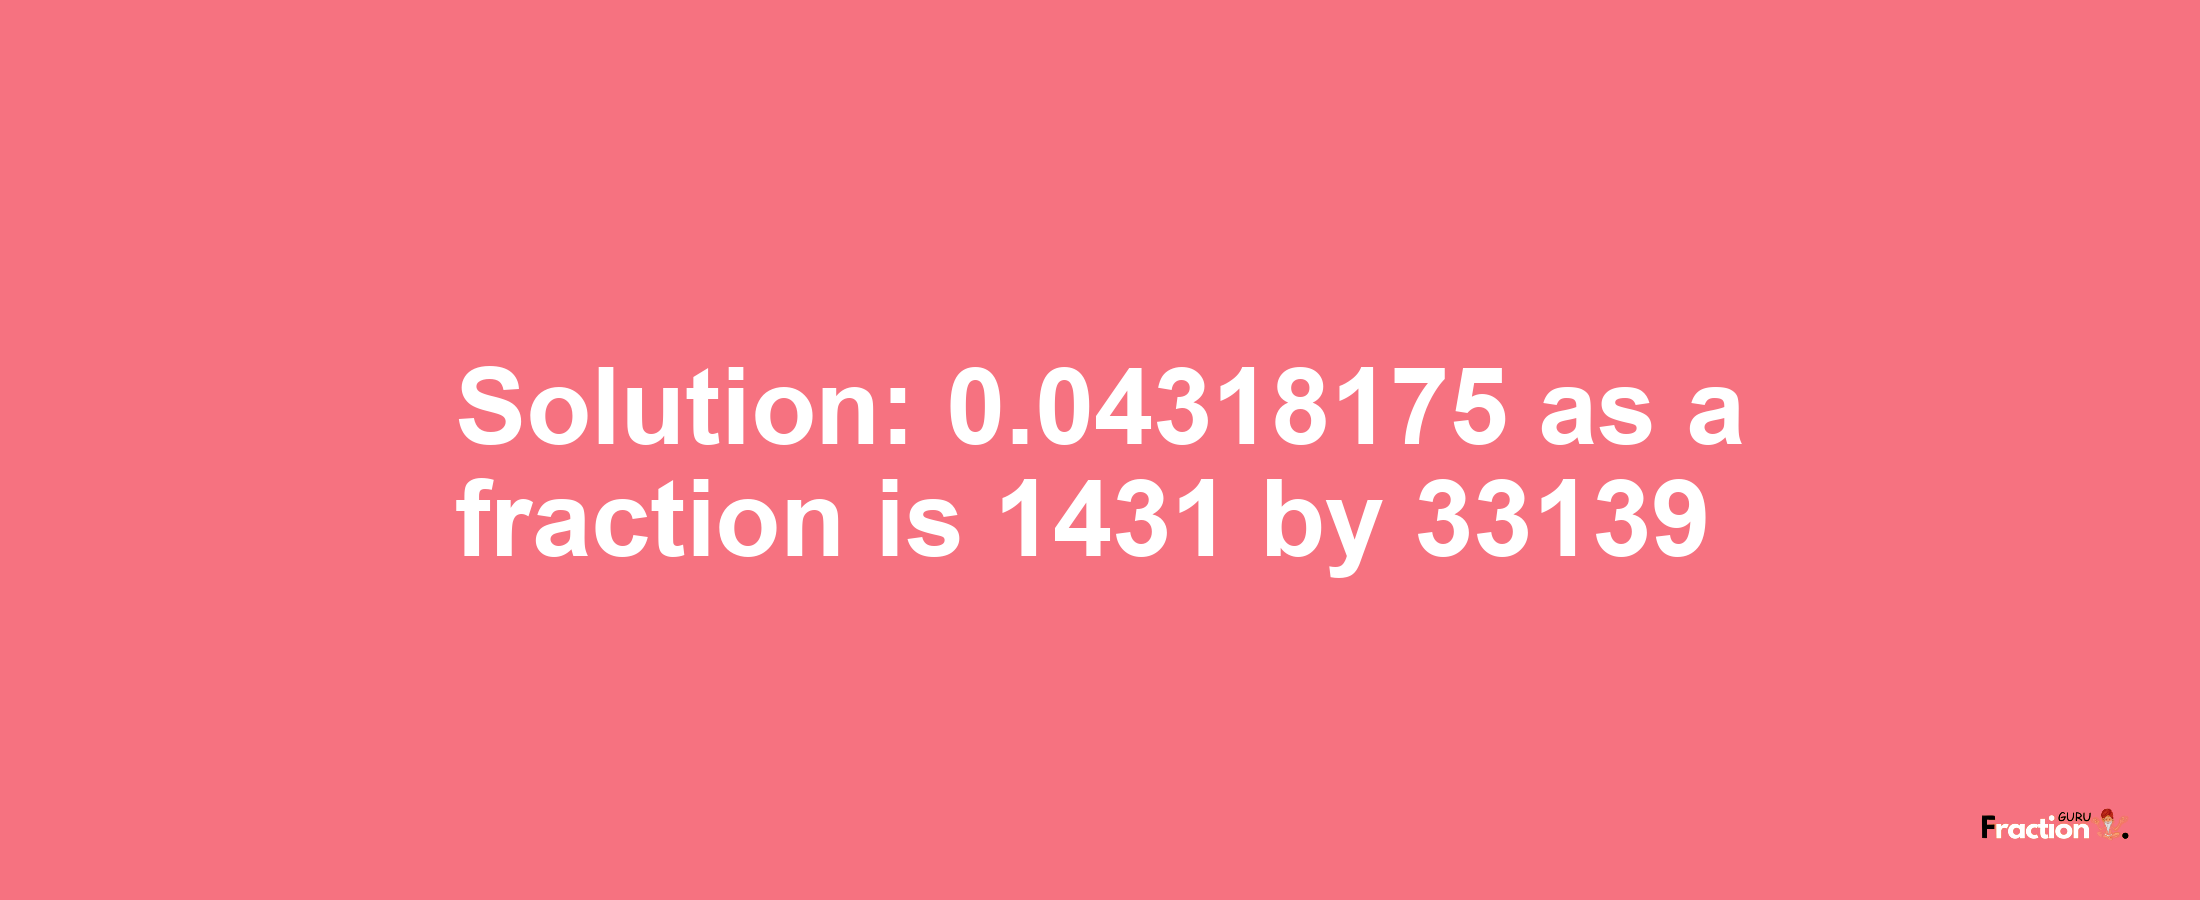 Solution:0.04318175 as a fraction is 1431/33139